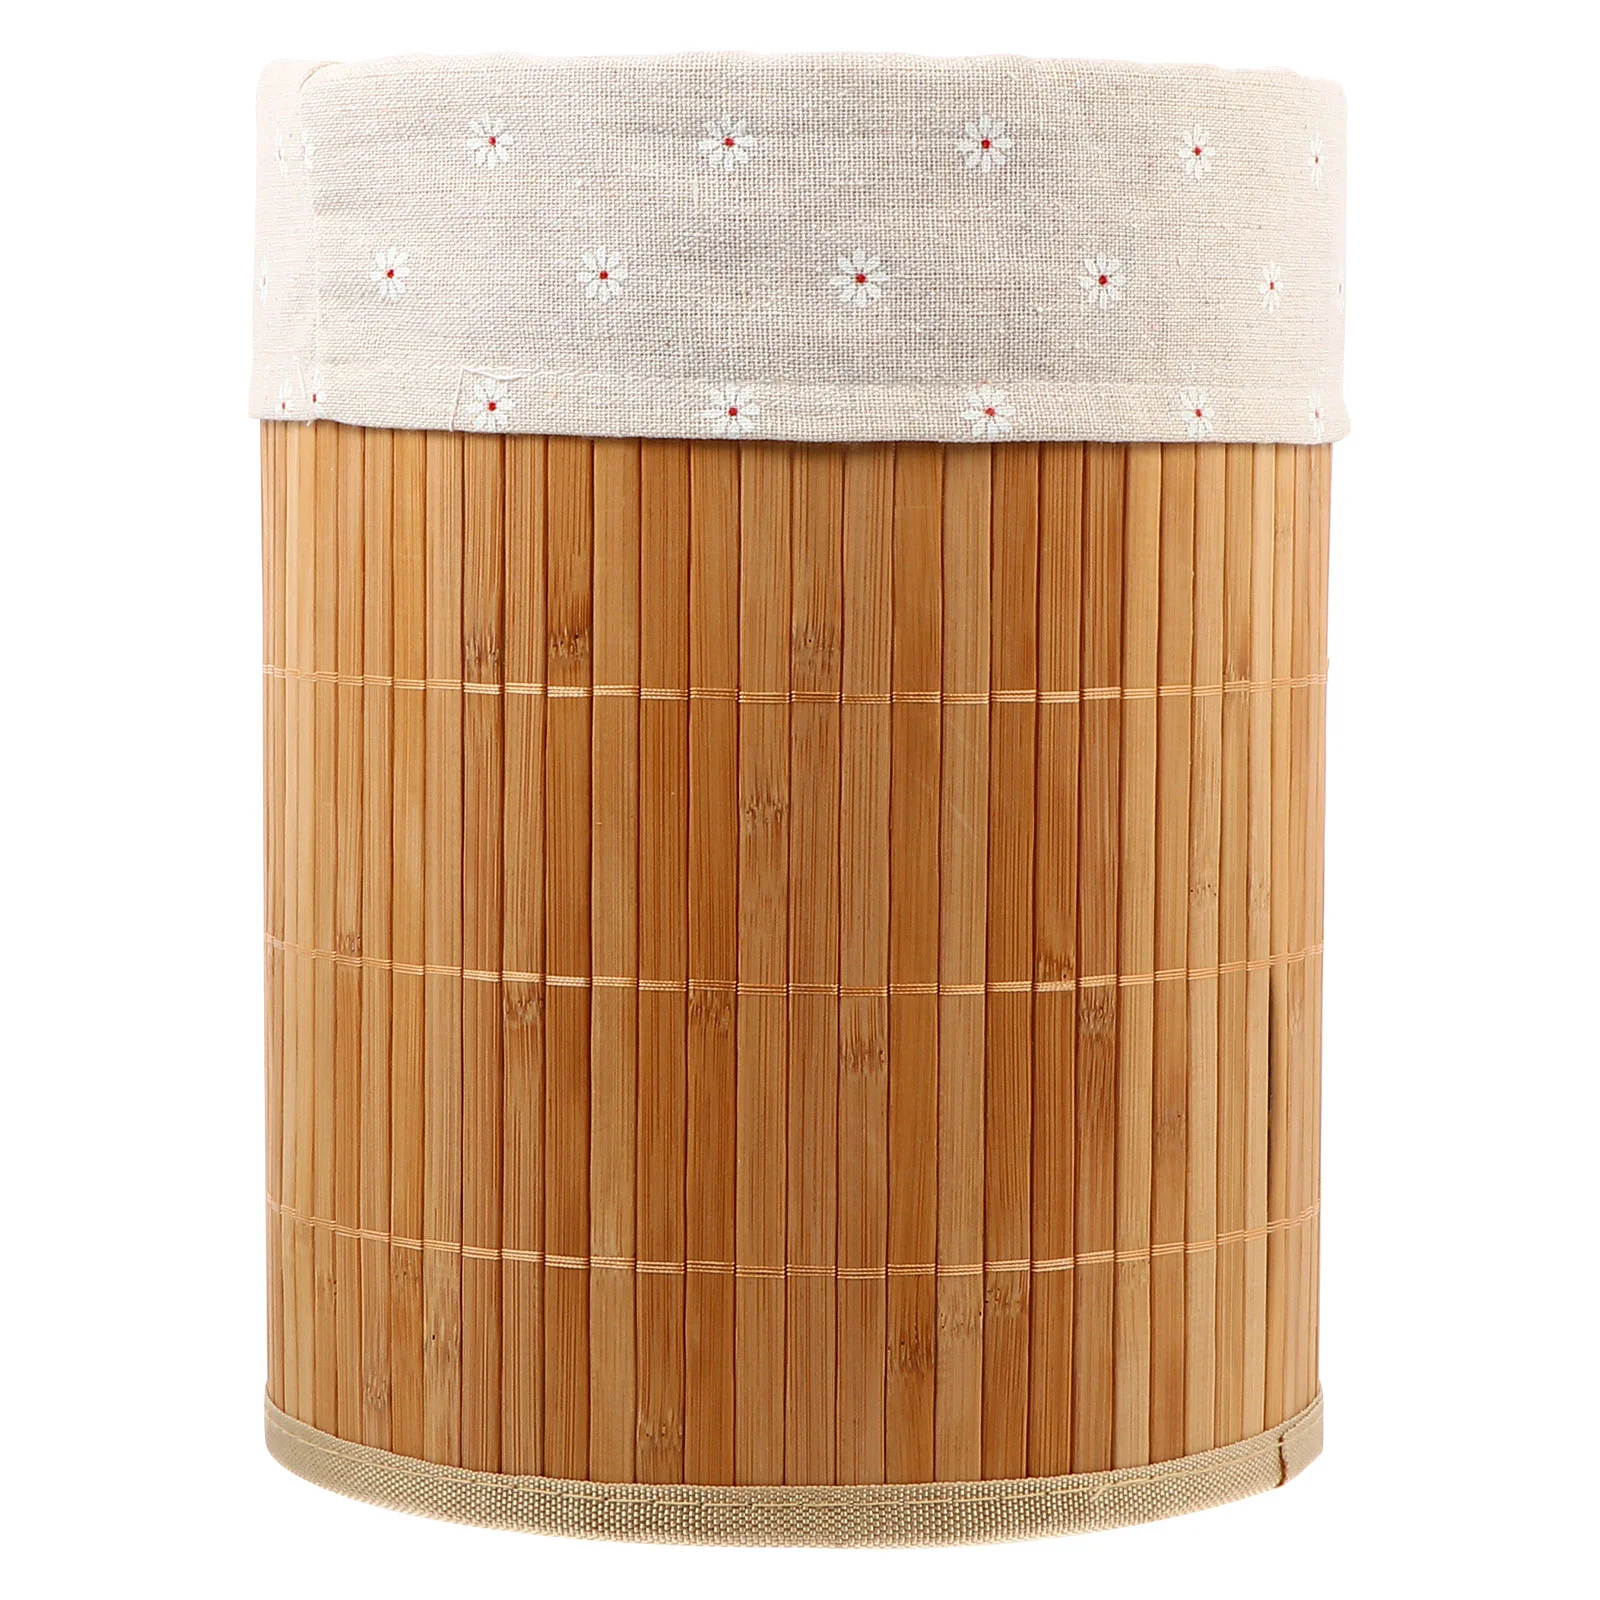 

Bamboo Trash Can Collapsible Laundry Hamper Clothes Basket Wastebasket Storage Woven Rib Sundries Bucket Dirty Organizer